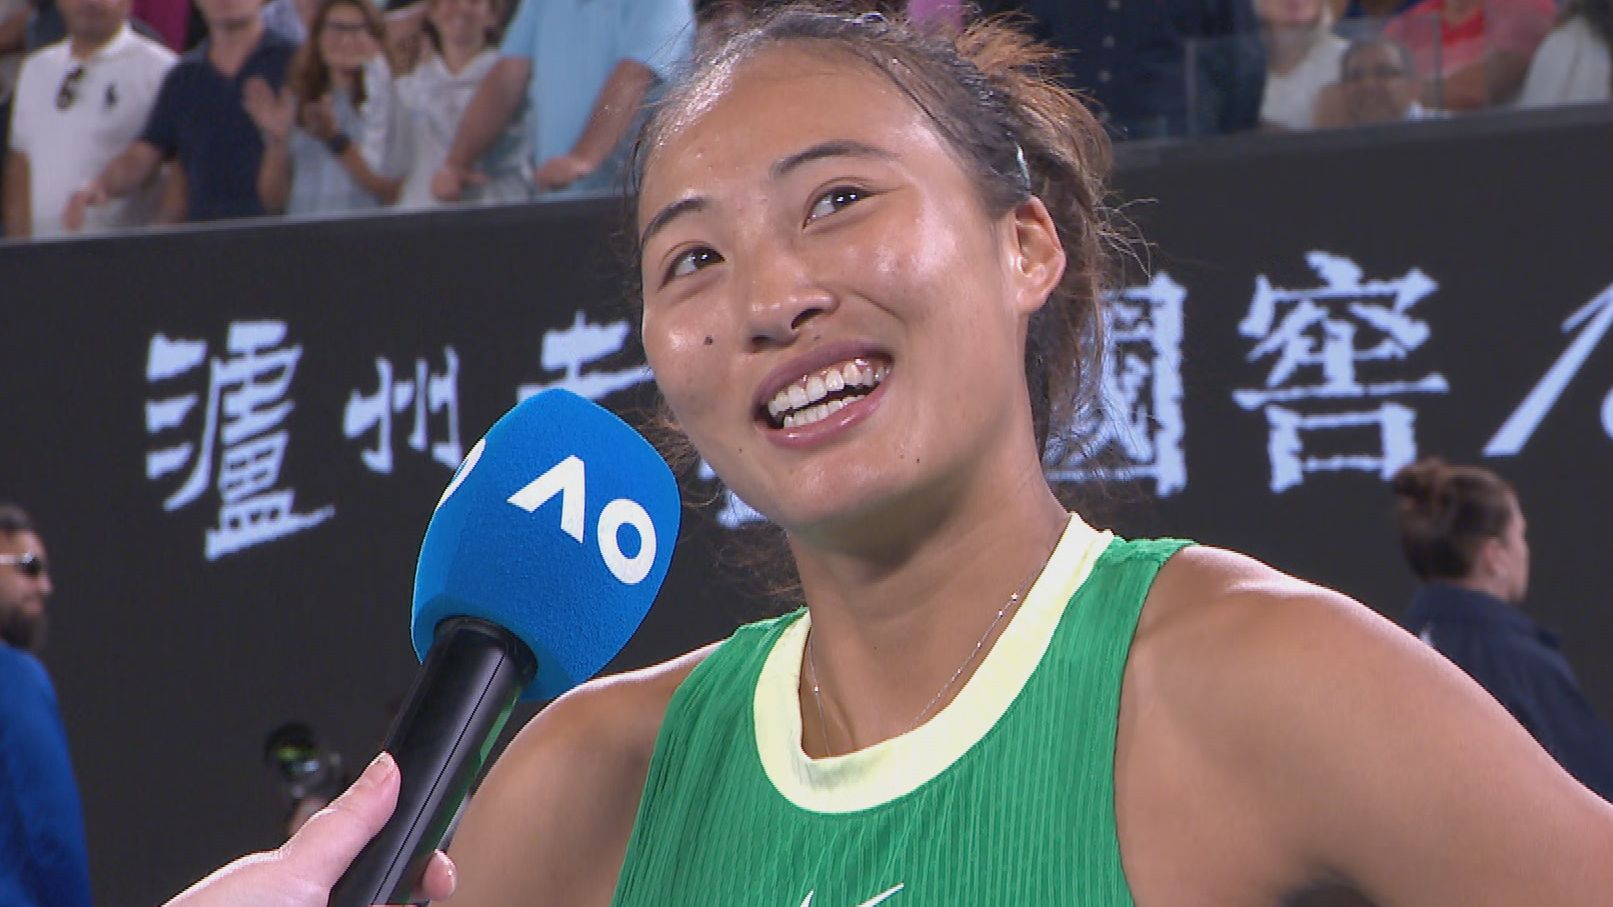 Qinwen Zheng in her post-match interview with Jelena Dokic